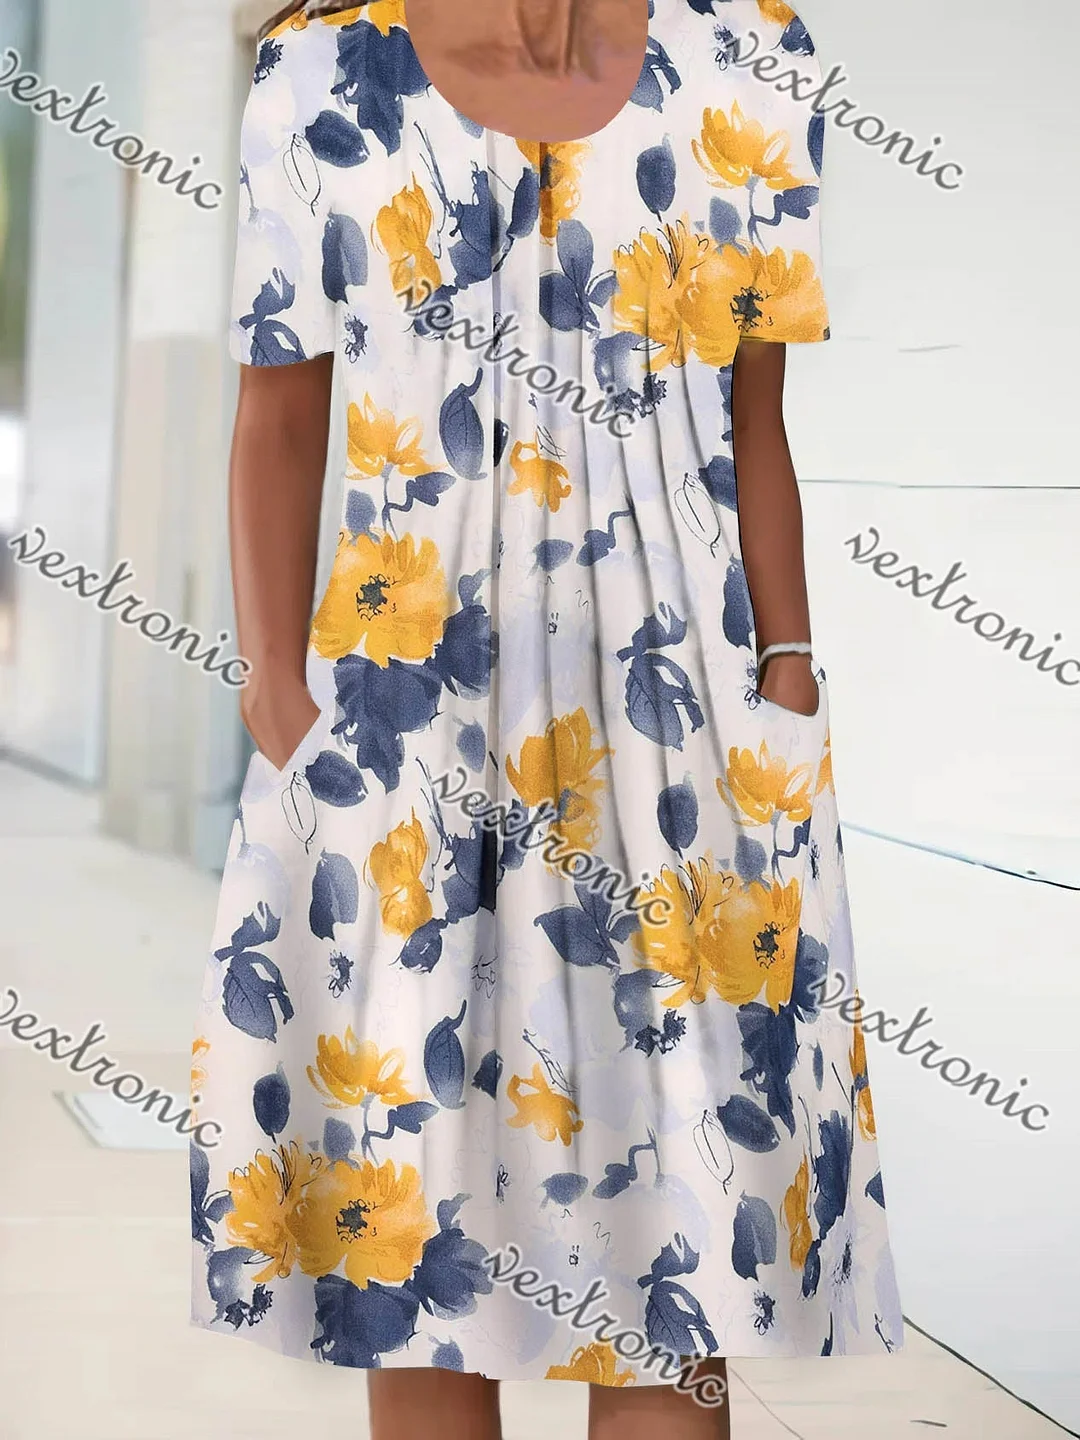 Women's Short Sleeve Scoop Neck Floral Printed Graphic Midi Dress